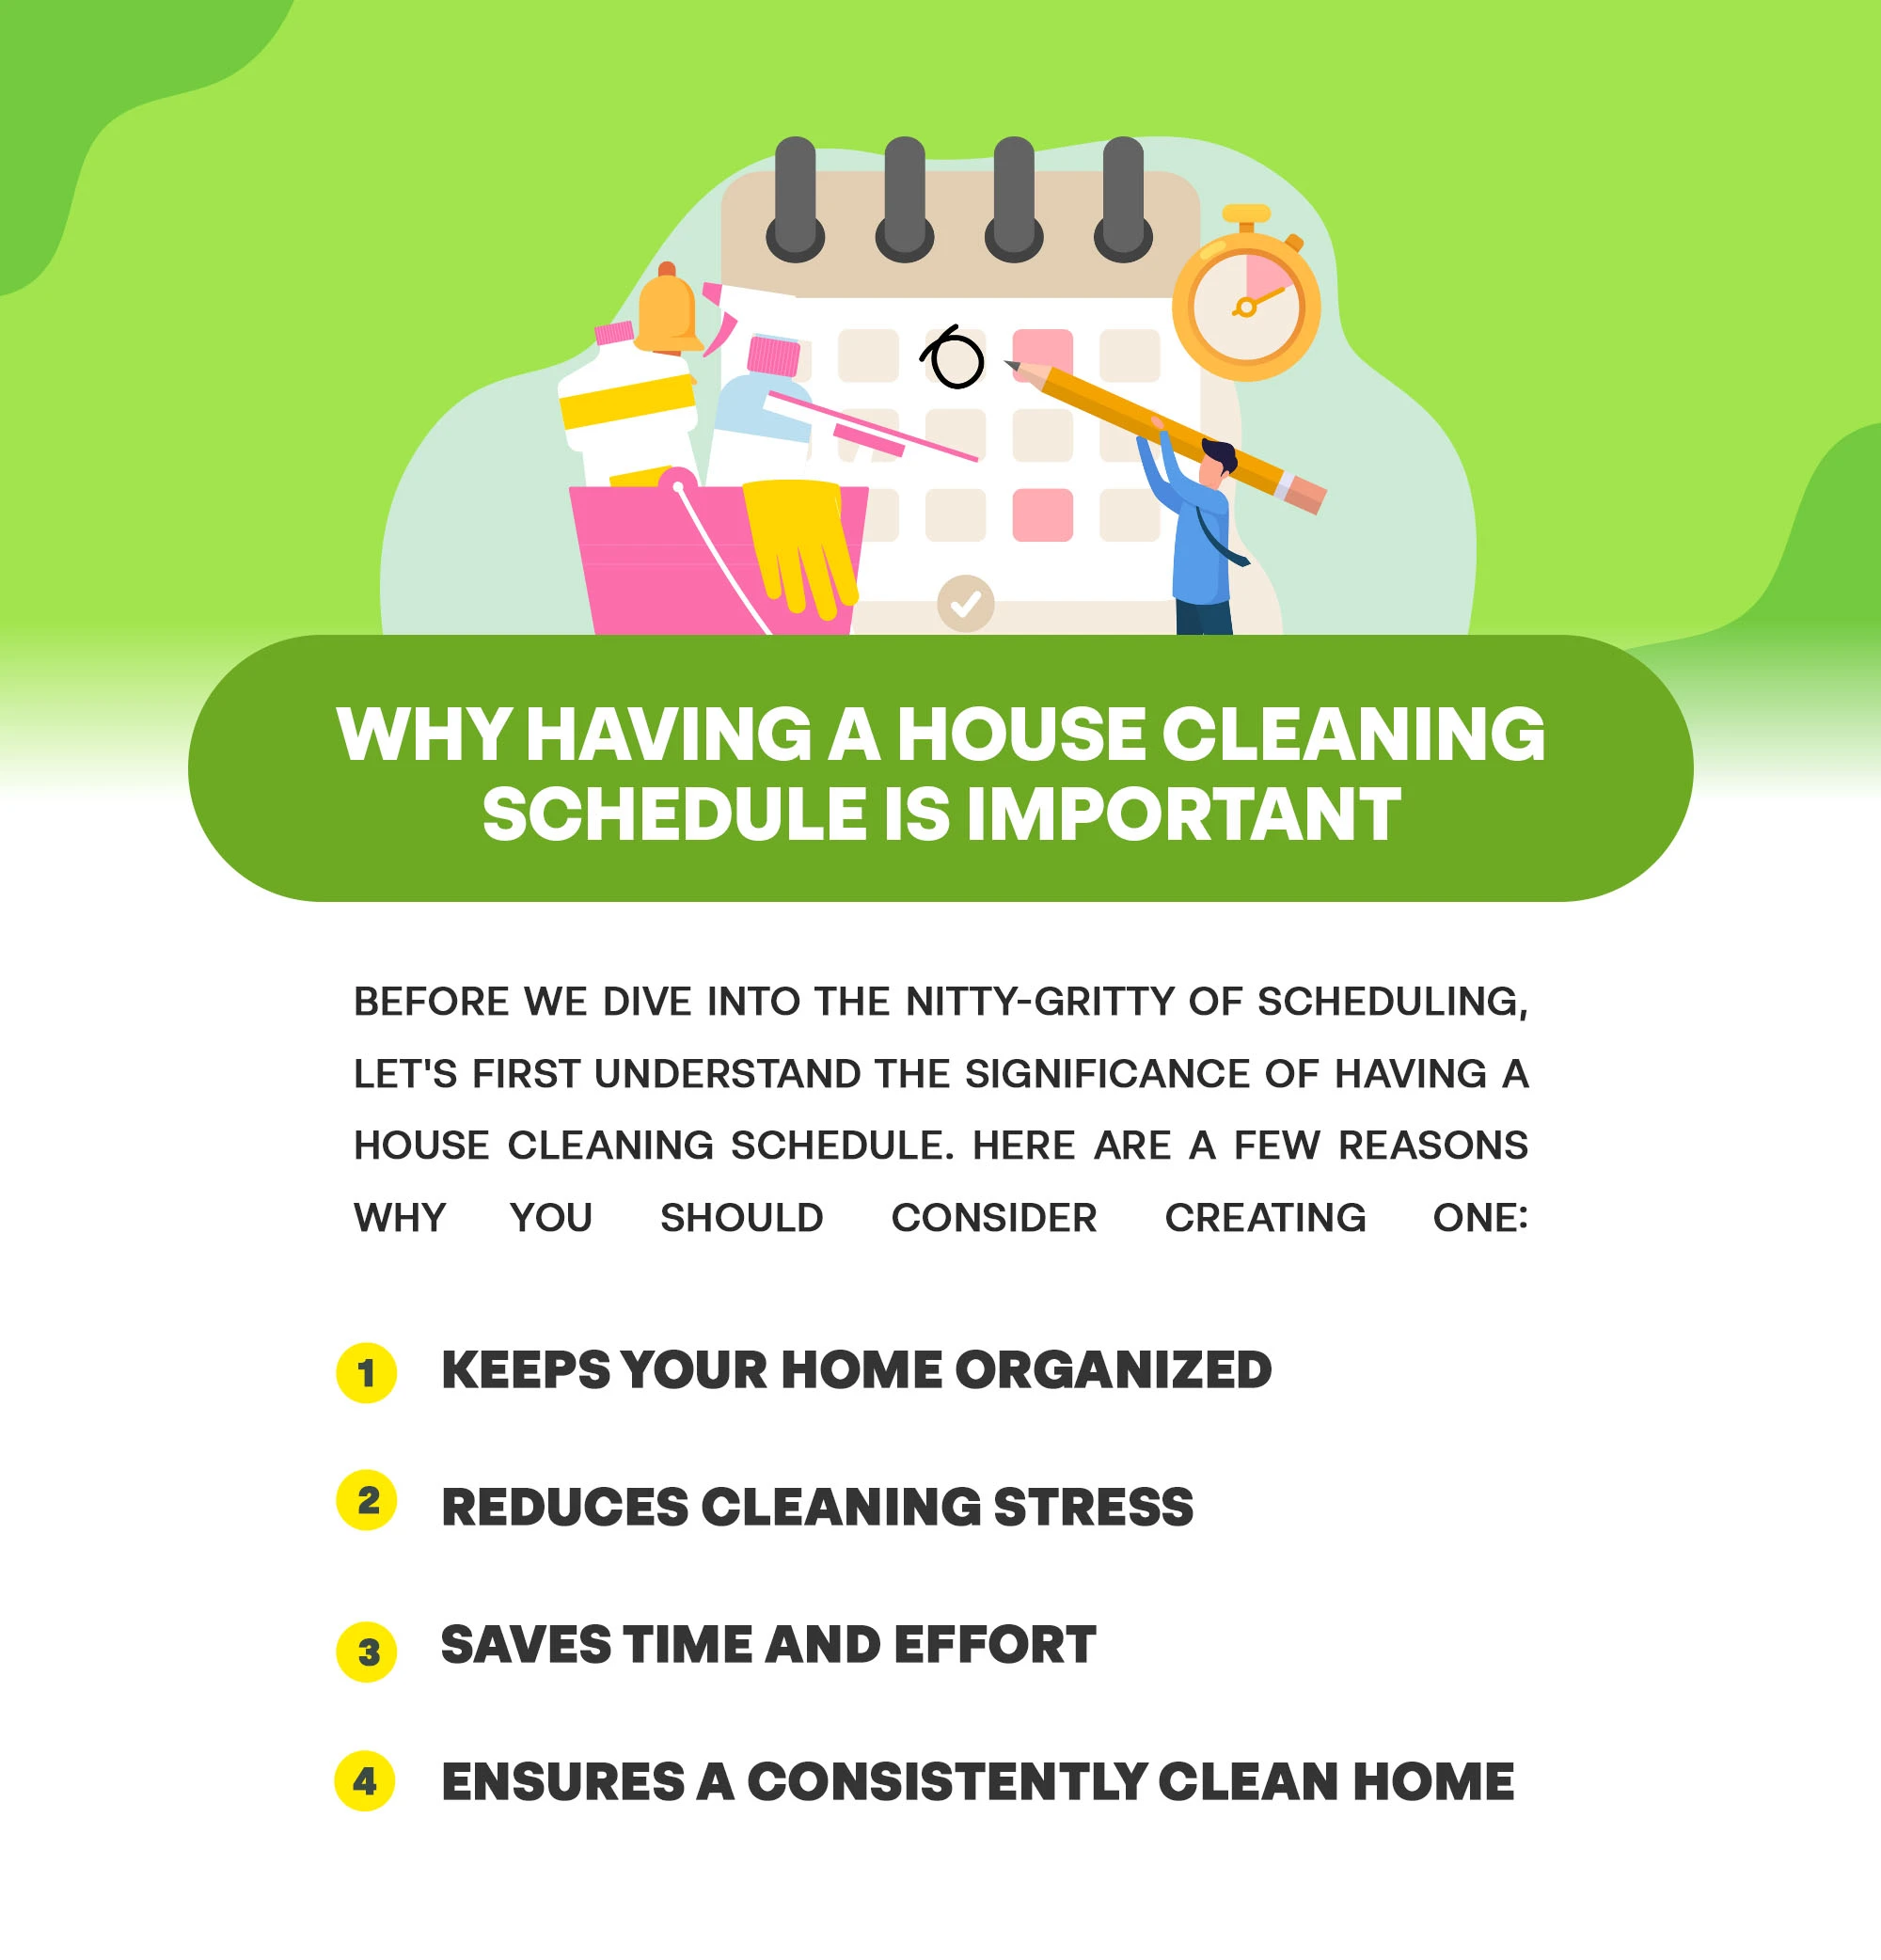 Why Having a House Cleaning Schedule Is Important